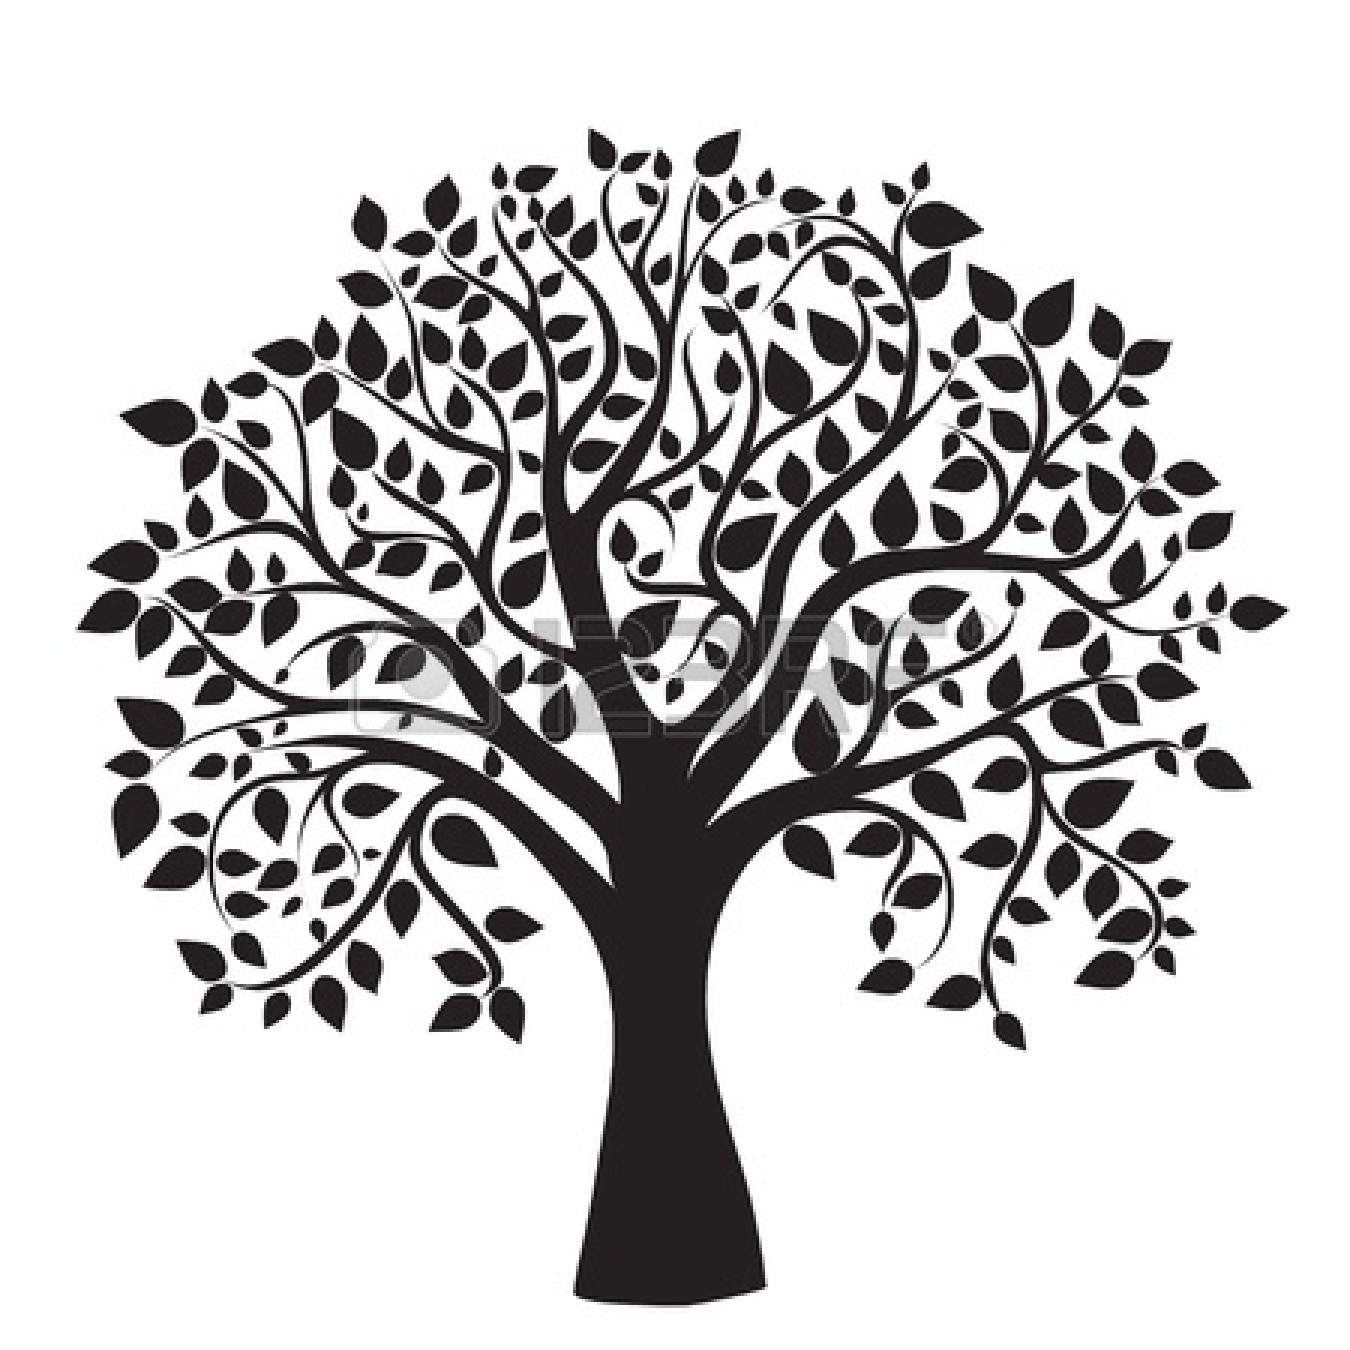 Tree of life clipart.